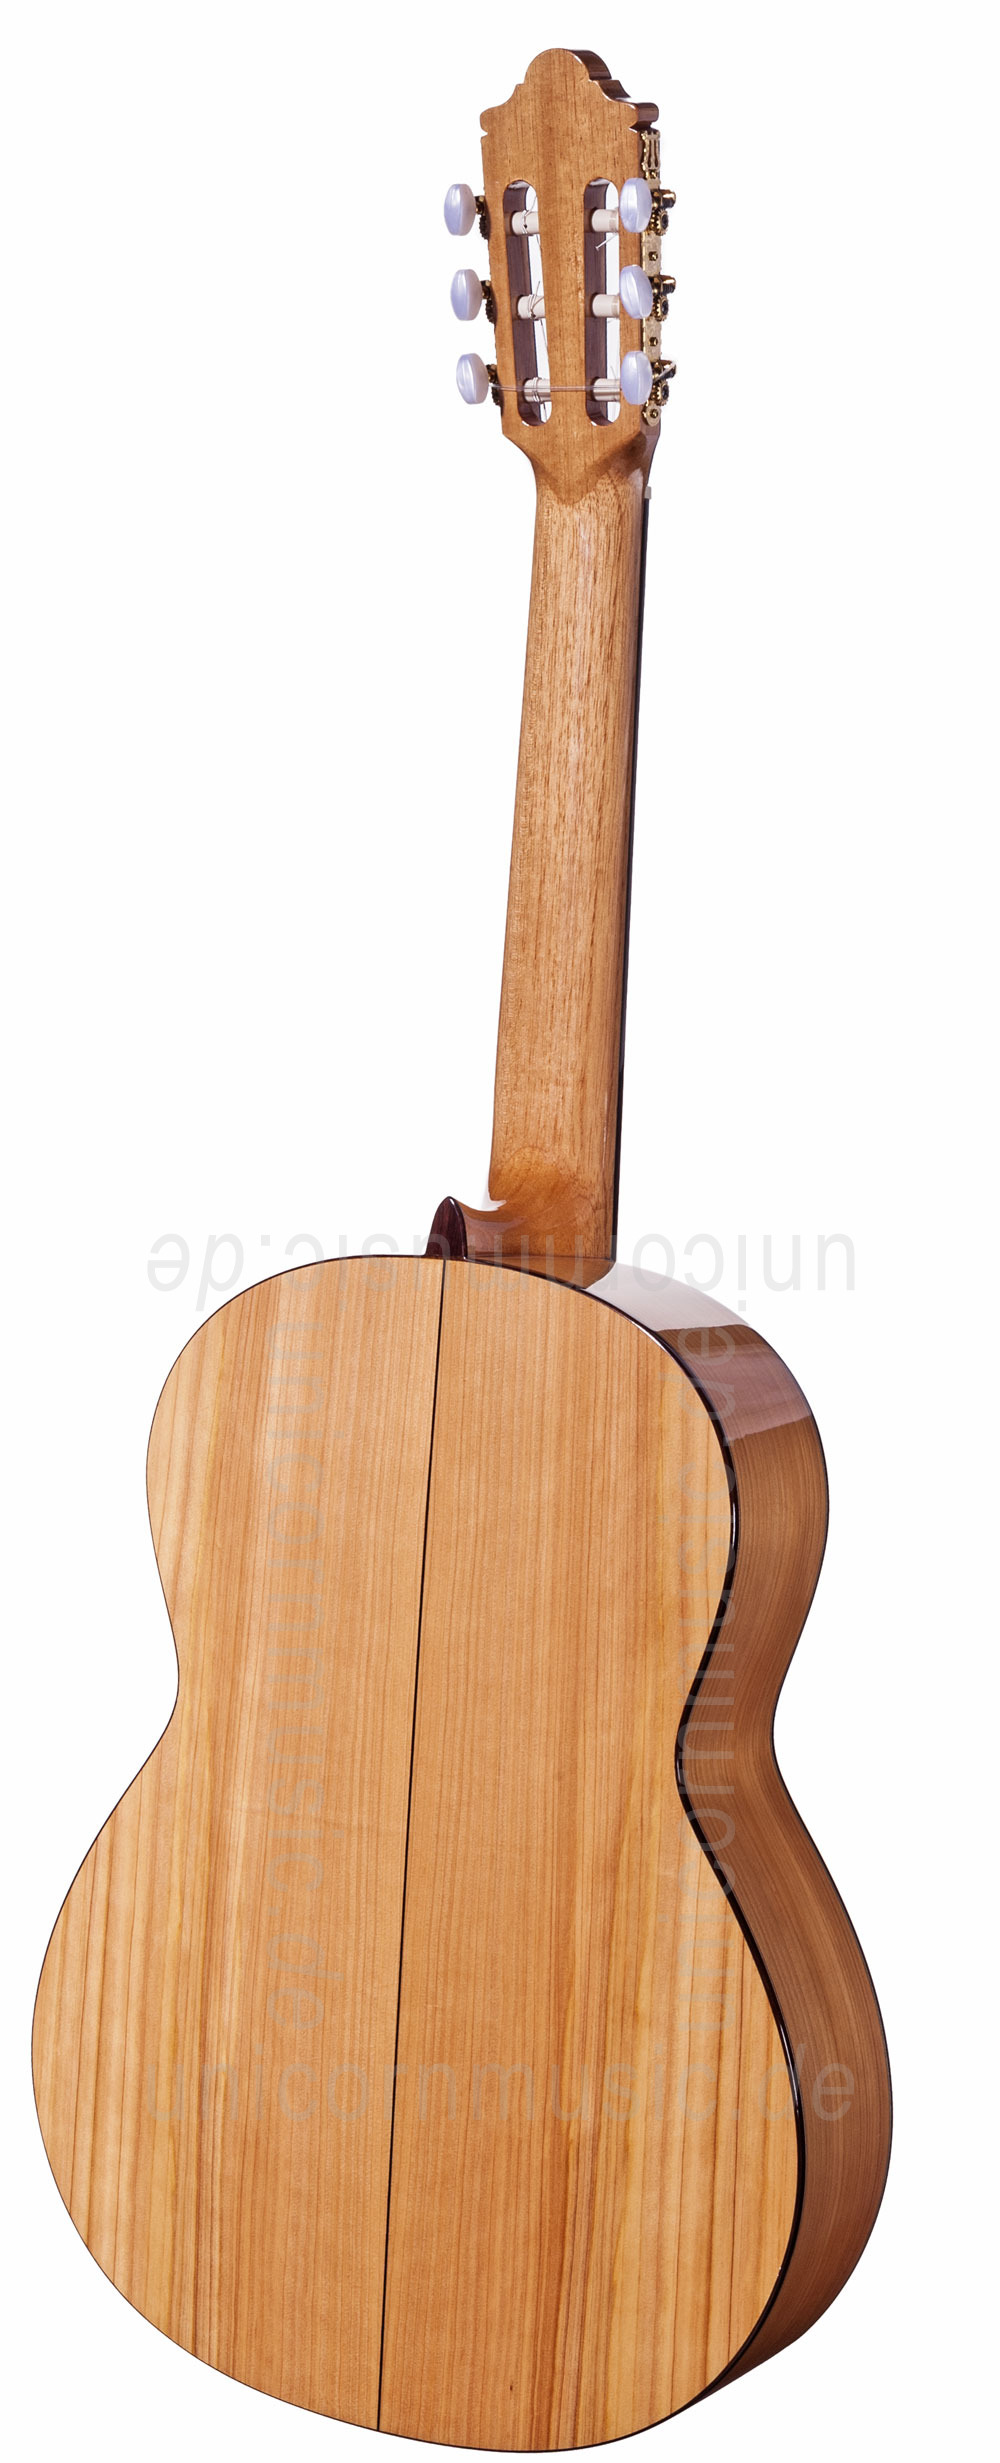 to article description / price Spanish Flamenco Guitar CAMPS M5-S-LH (blanca) - left hand - solid spruce top - Sandalwood